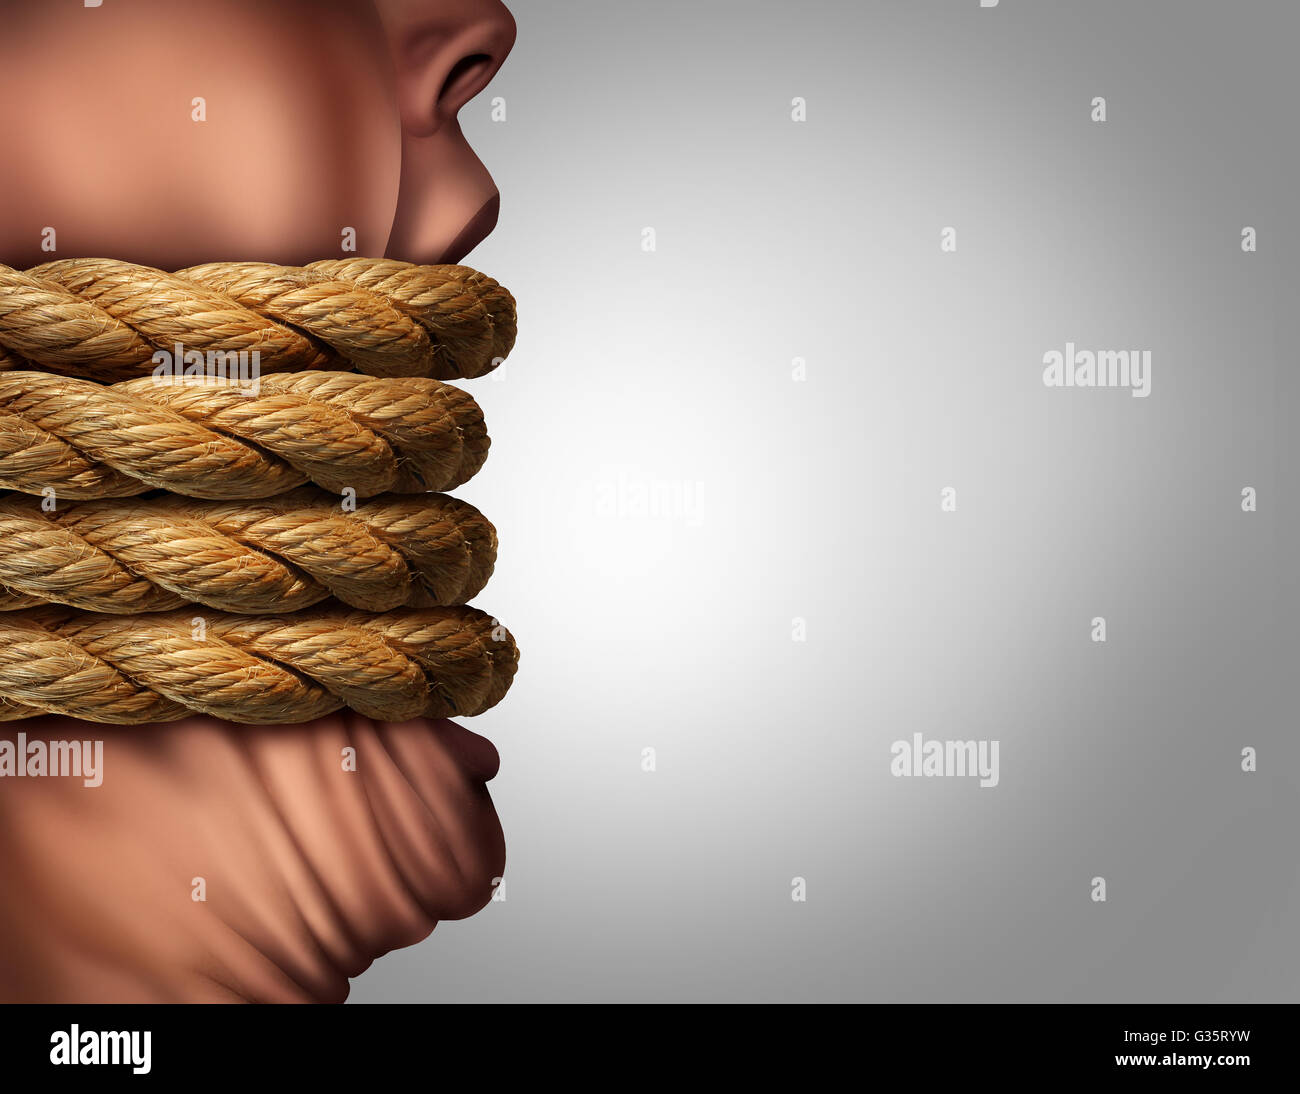 Kidnapped hostage abduction concept as a person with a big mouth tied with ropes as a censorship and suppression metaphor for communication problem in a photo realistic 3D illustration style. Stock Photo